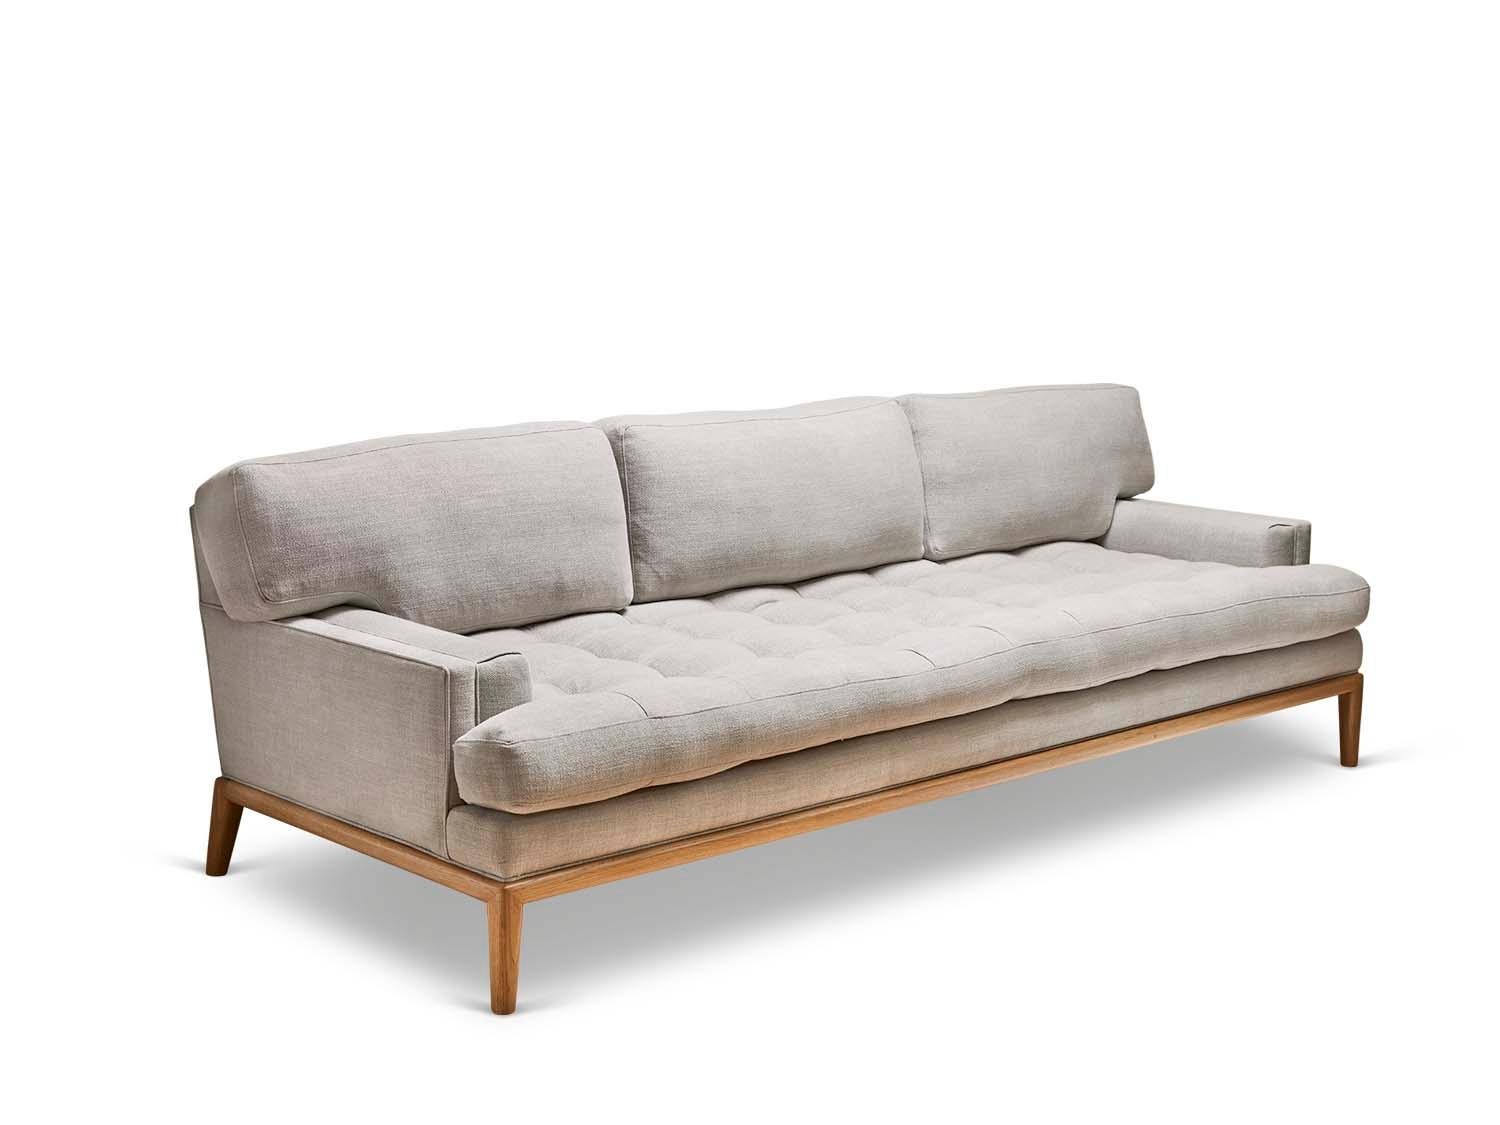 The Forster sofa is a midcentury inspired sofa with a loose tufted seat, loose back cushions, and piped details. The sofa rests atop a simple, rounded wood base.

The Lawson-Fenning collection is designed and handmade in Los Angeles, California.